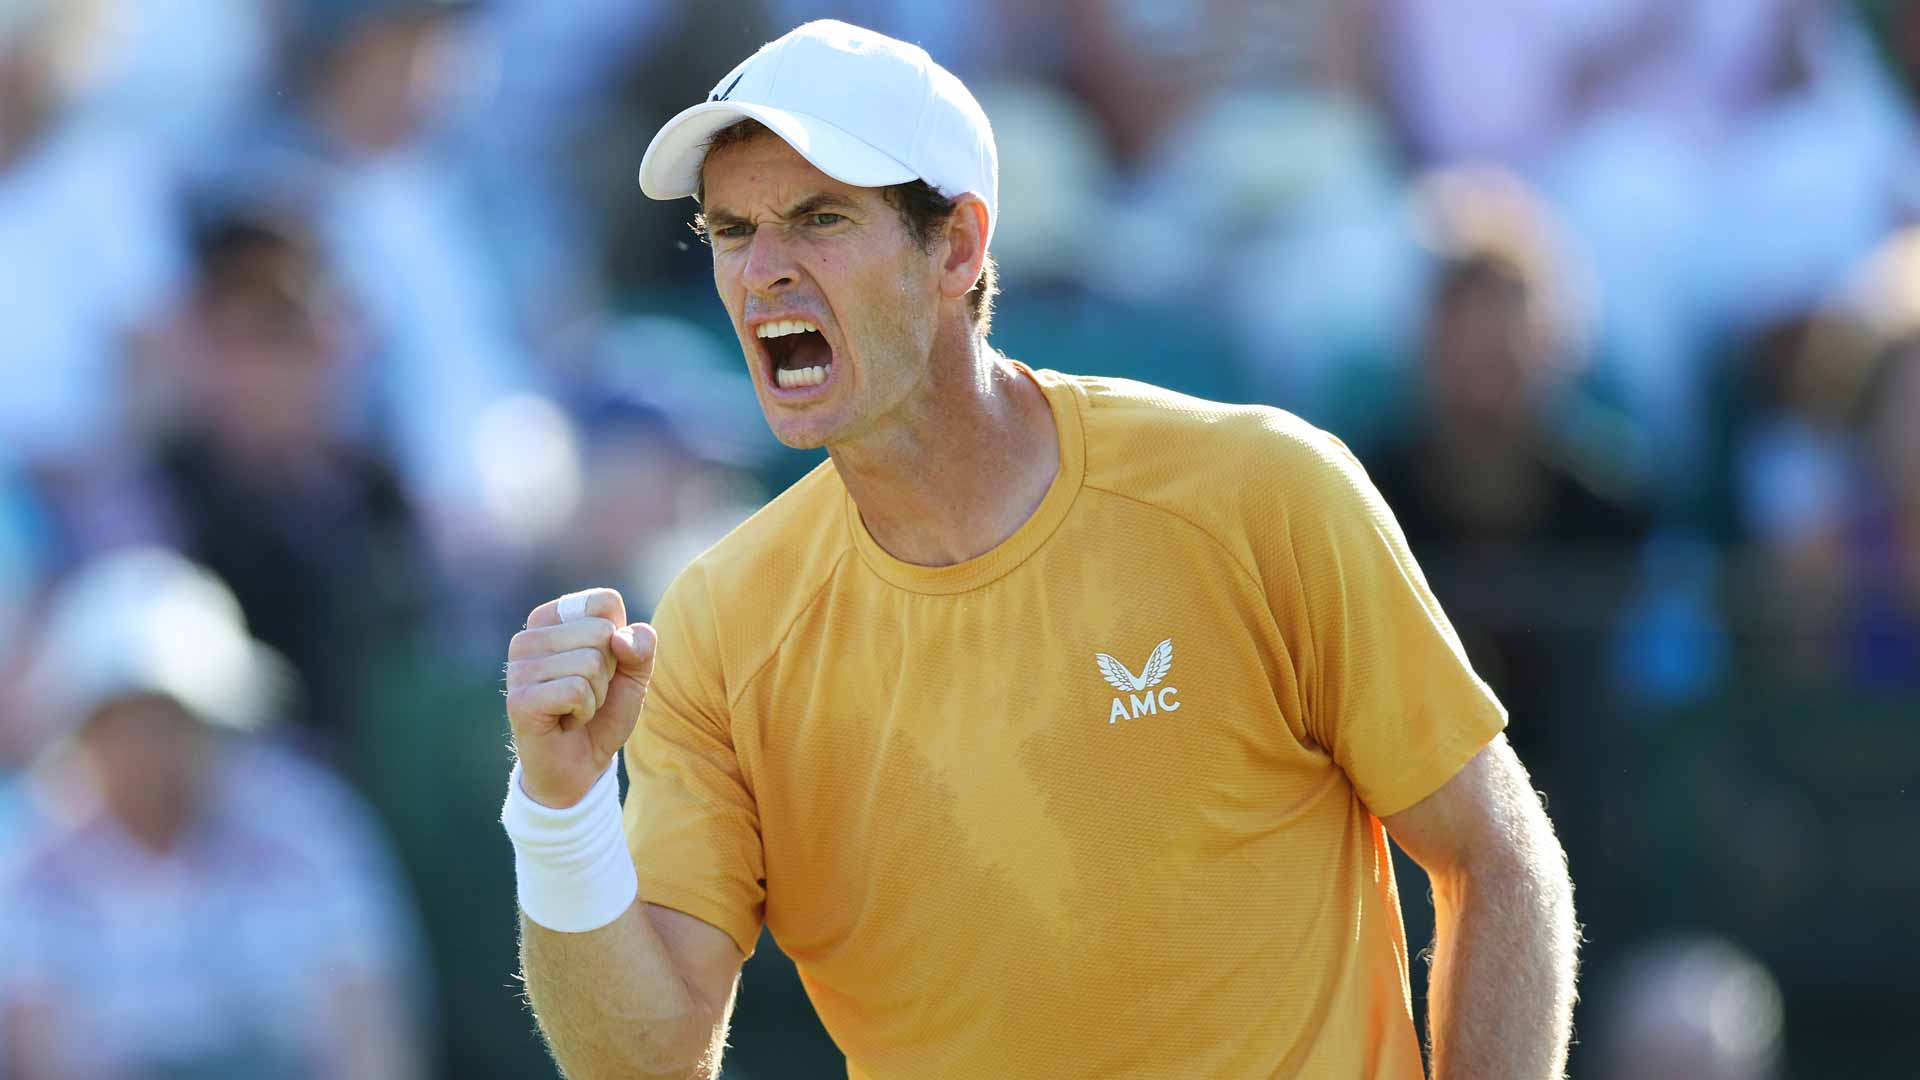 Andy Murray is in action this week at the Nottingham Challenger.